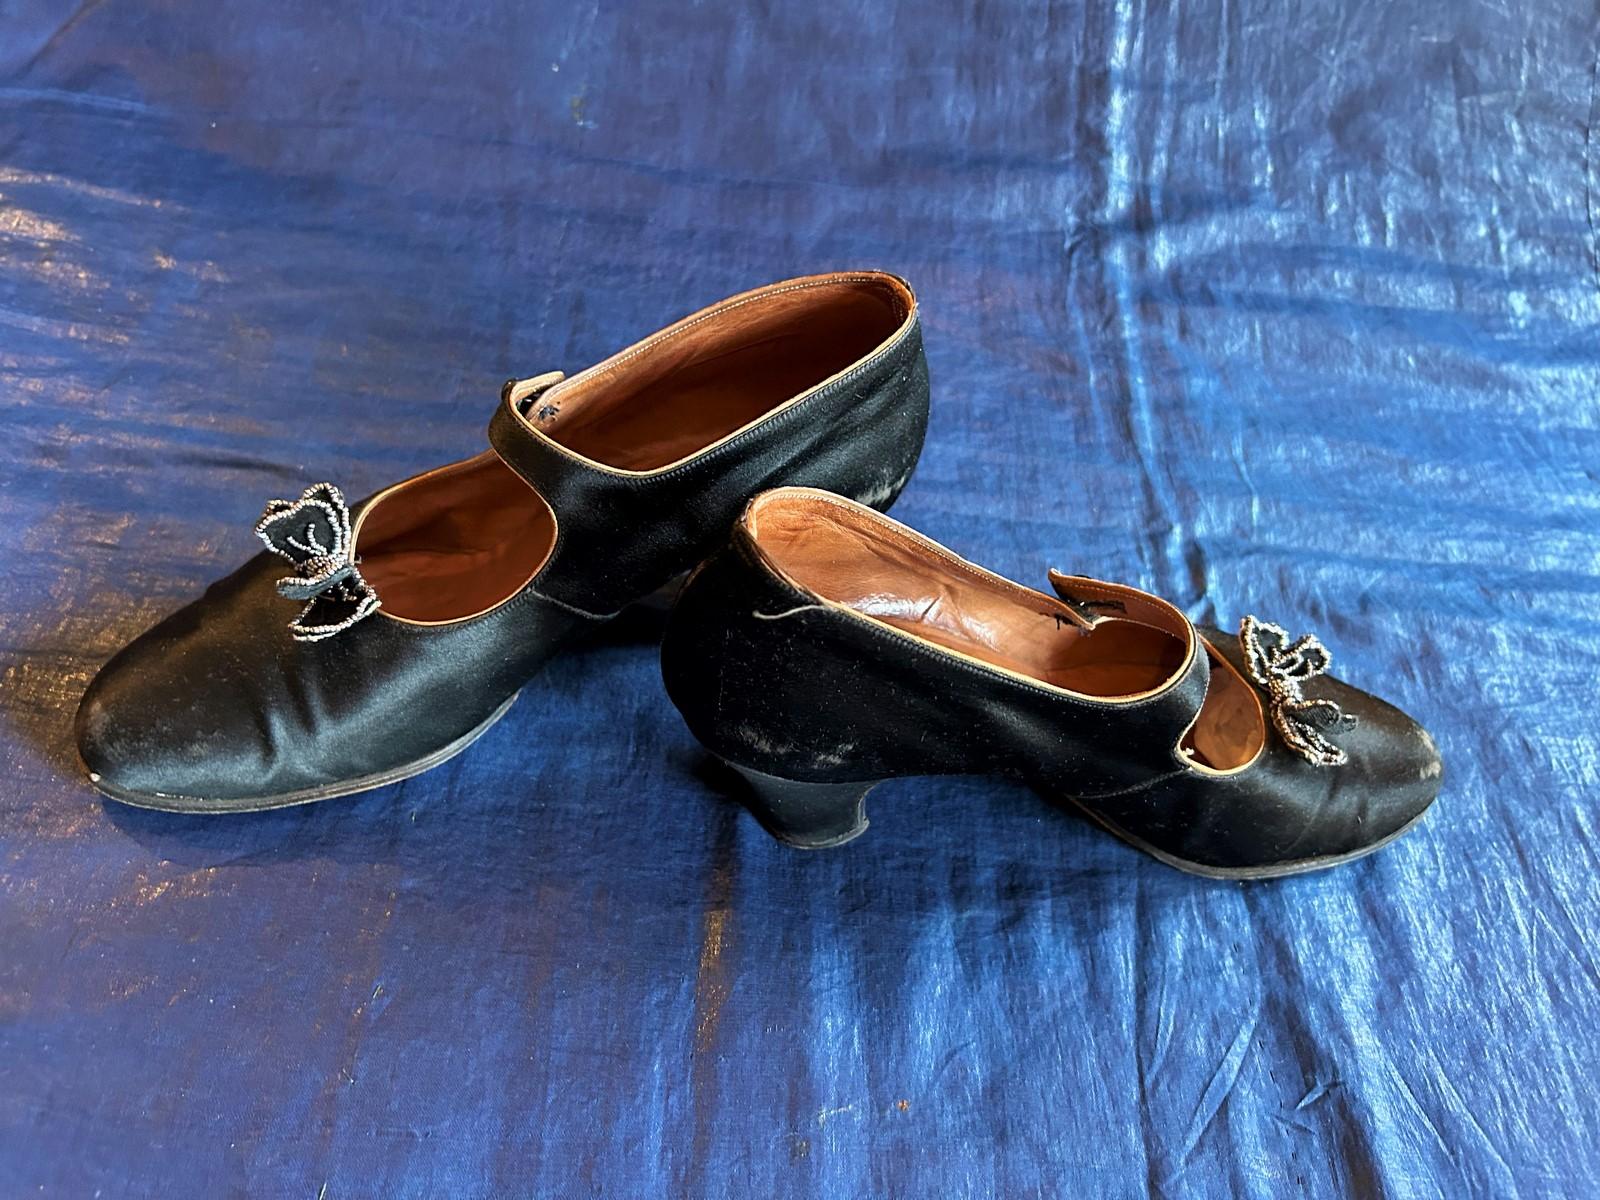 Women's Pair of Charles IX pumps Shoes in black satin - France Circa 1920-1930 For Sale